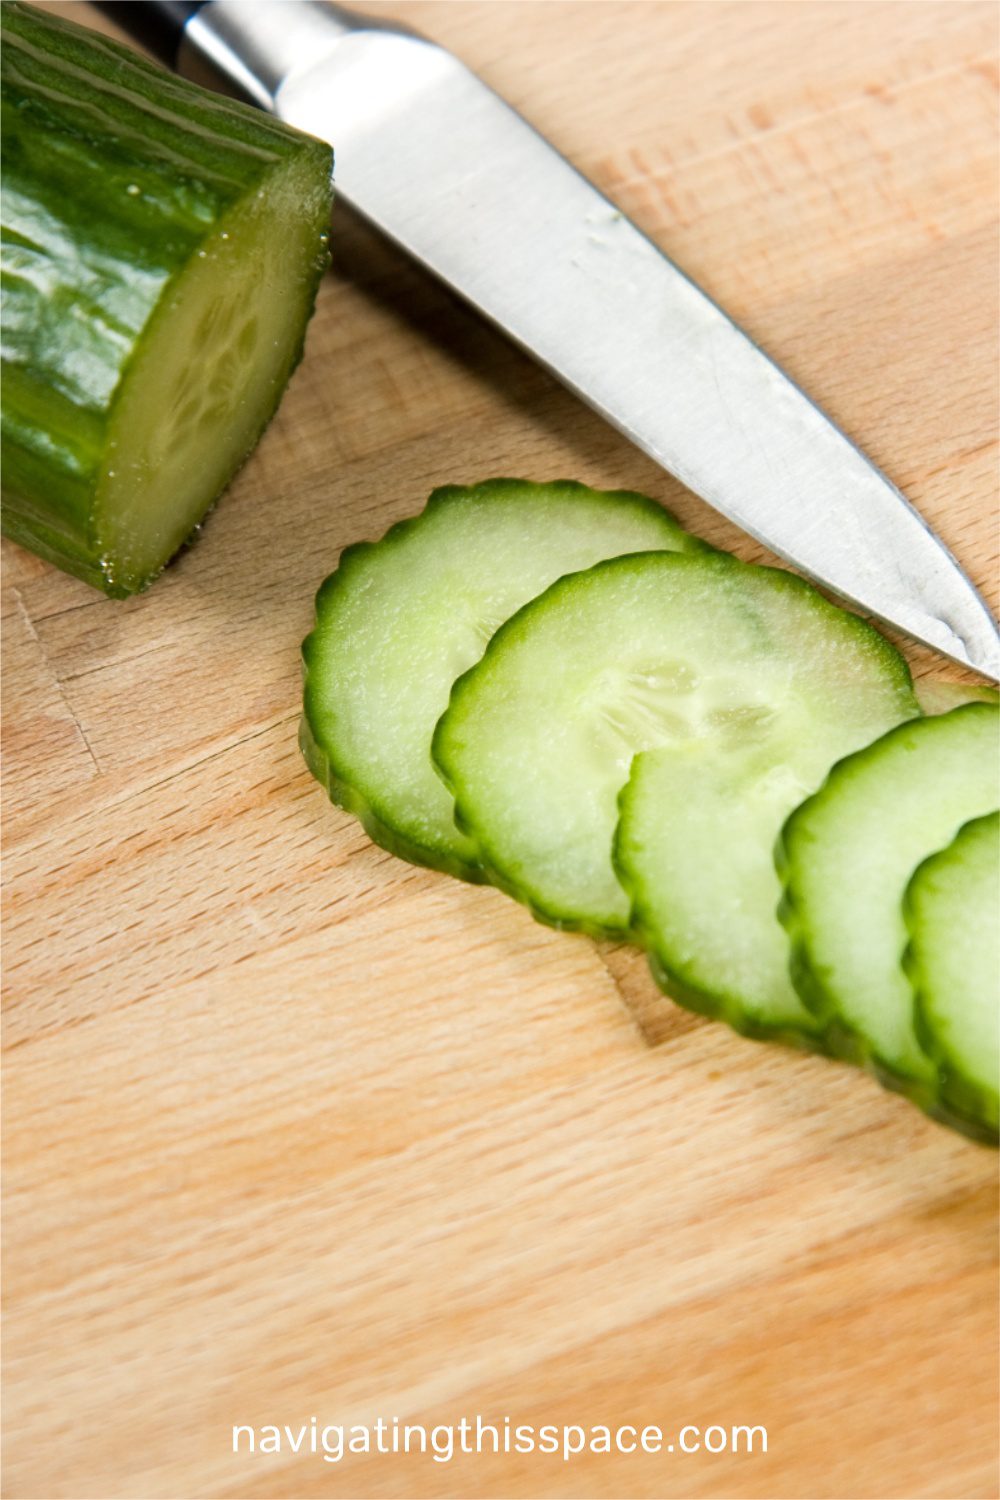 hydrating vegetable sliced cucumber on a cutting board with a knife is another way to drink more water